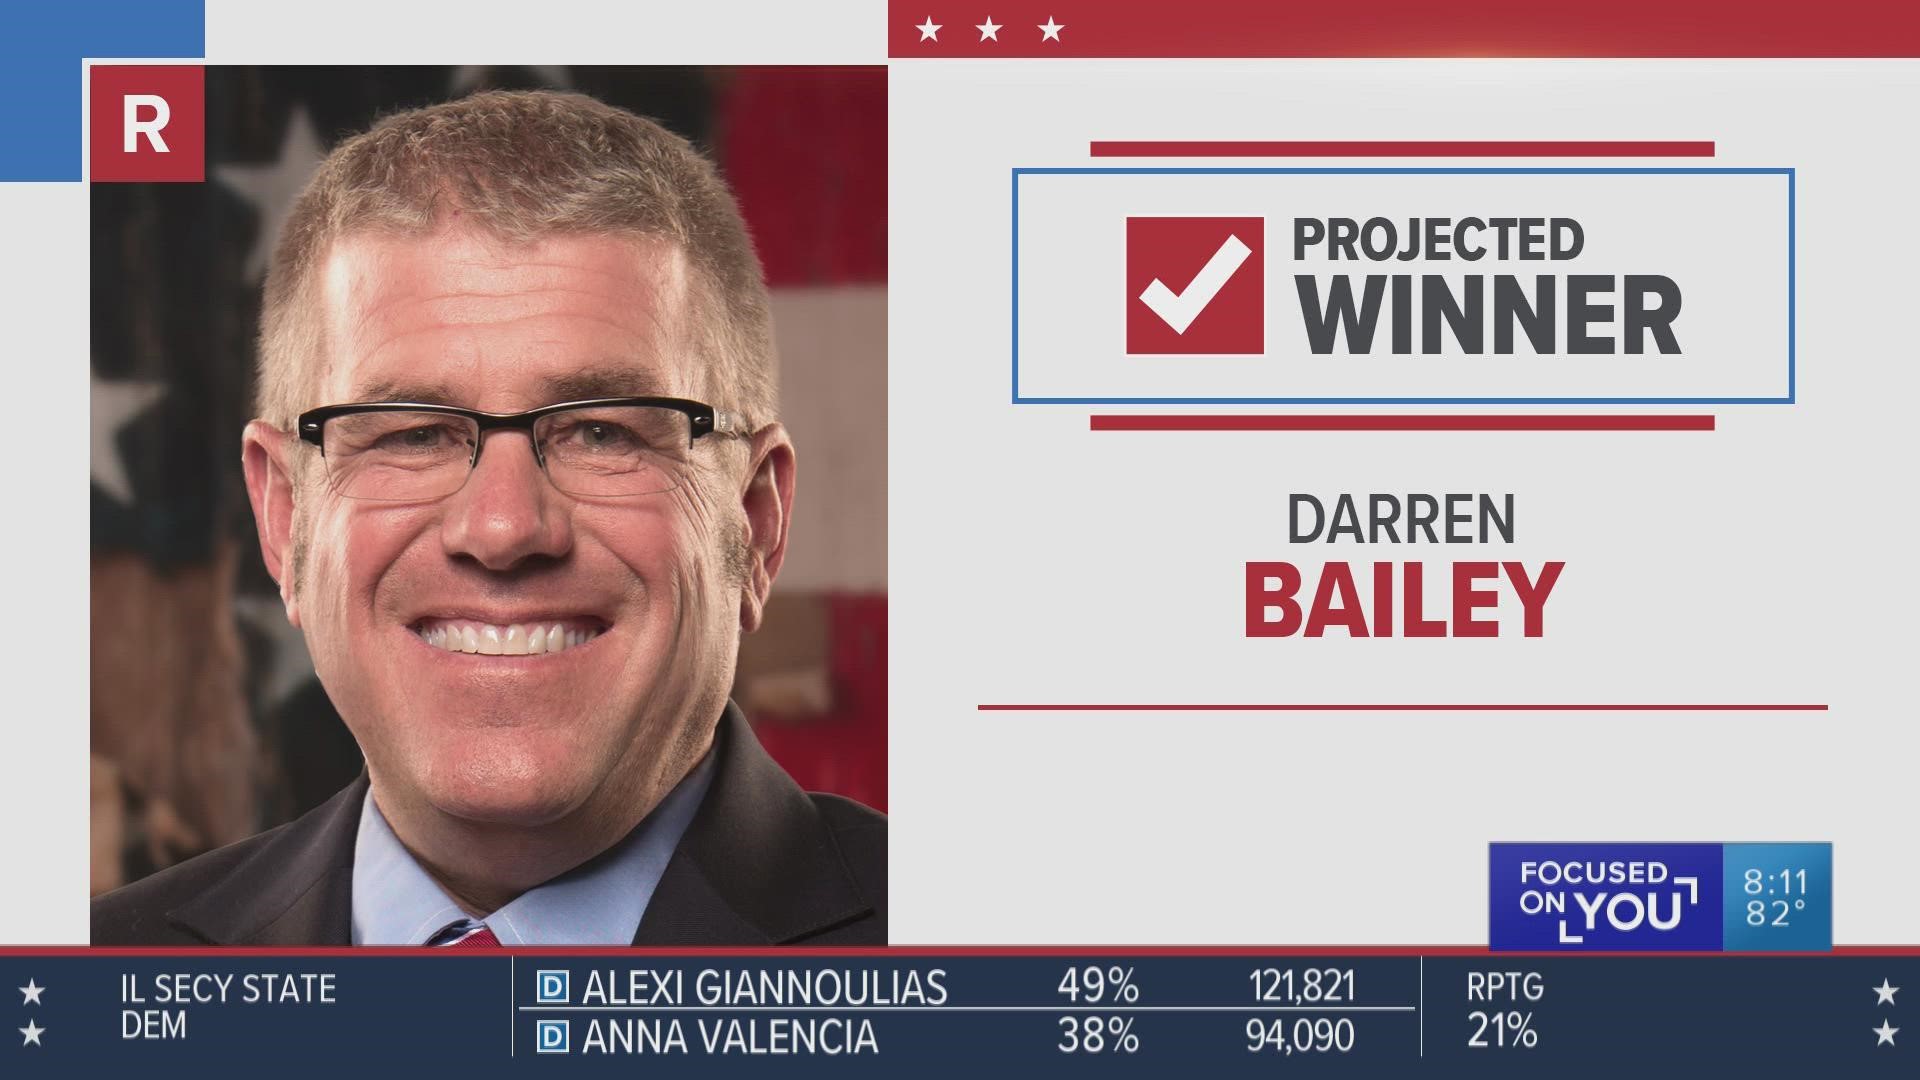 Incumbent J.B. Pritzker will face Republican Darren Bailey in the upcoming general election for Illinois governor.